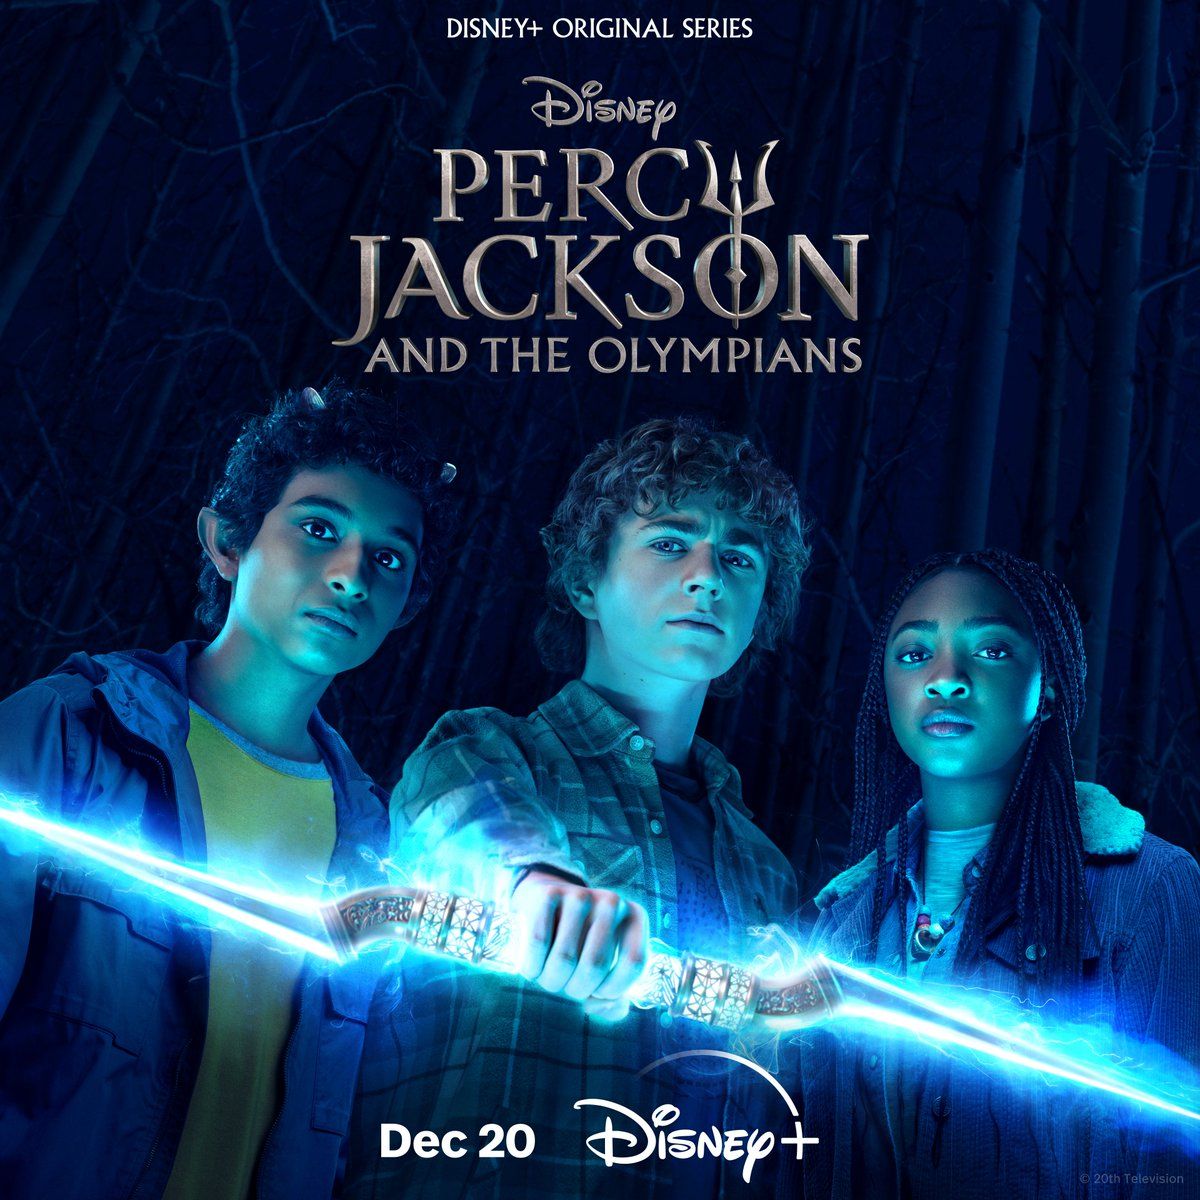 New “Percy Jackson And The Olympians” Character Posters Released